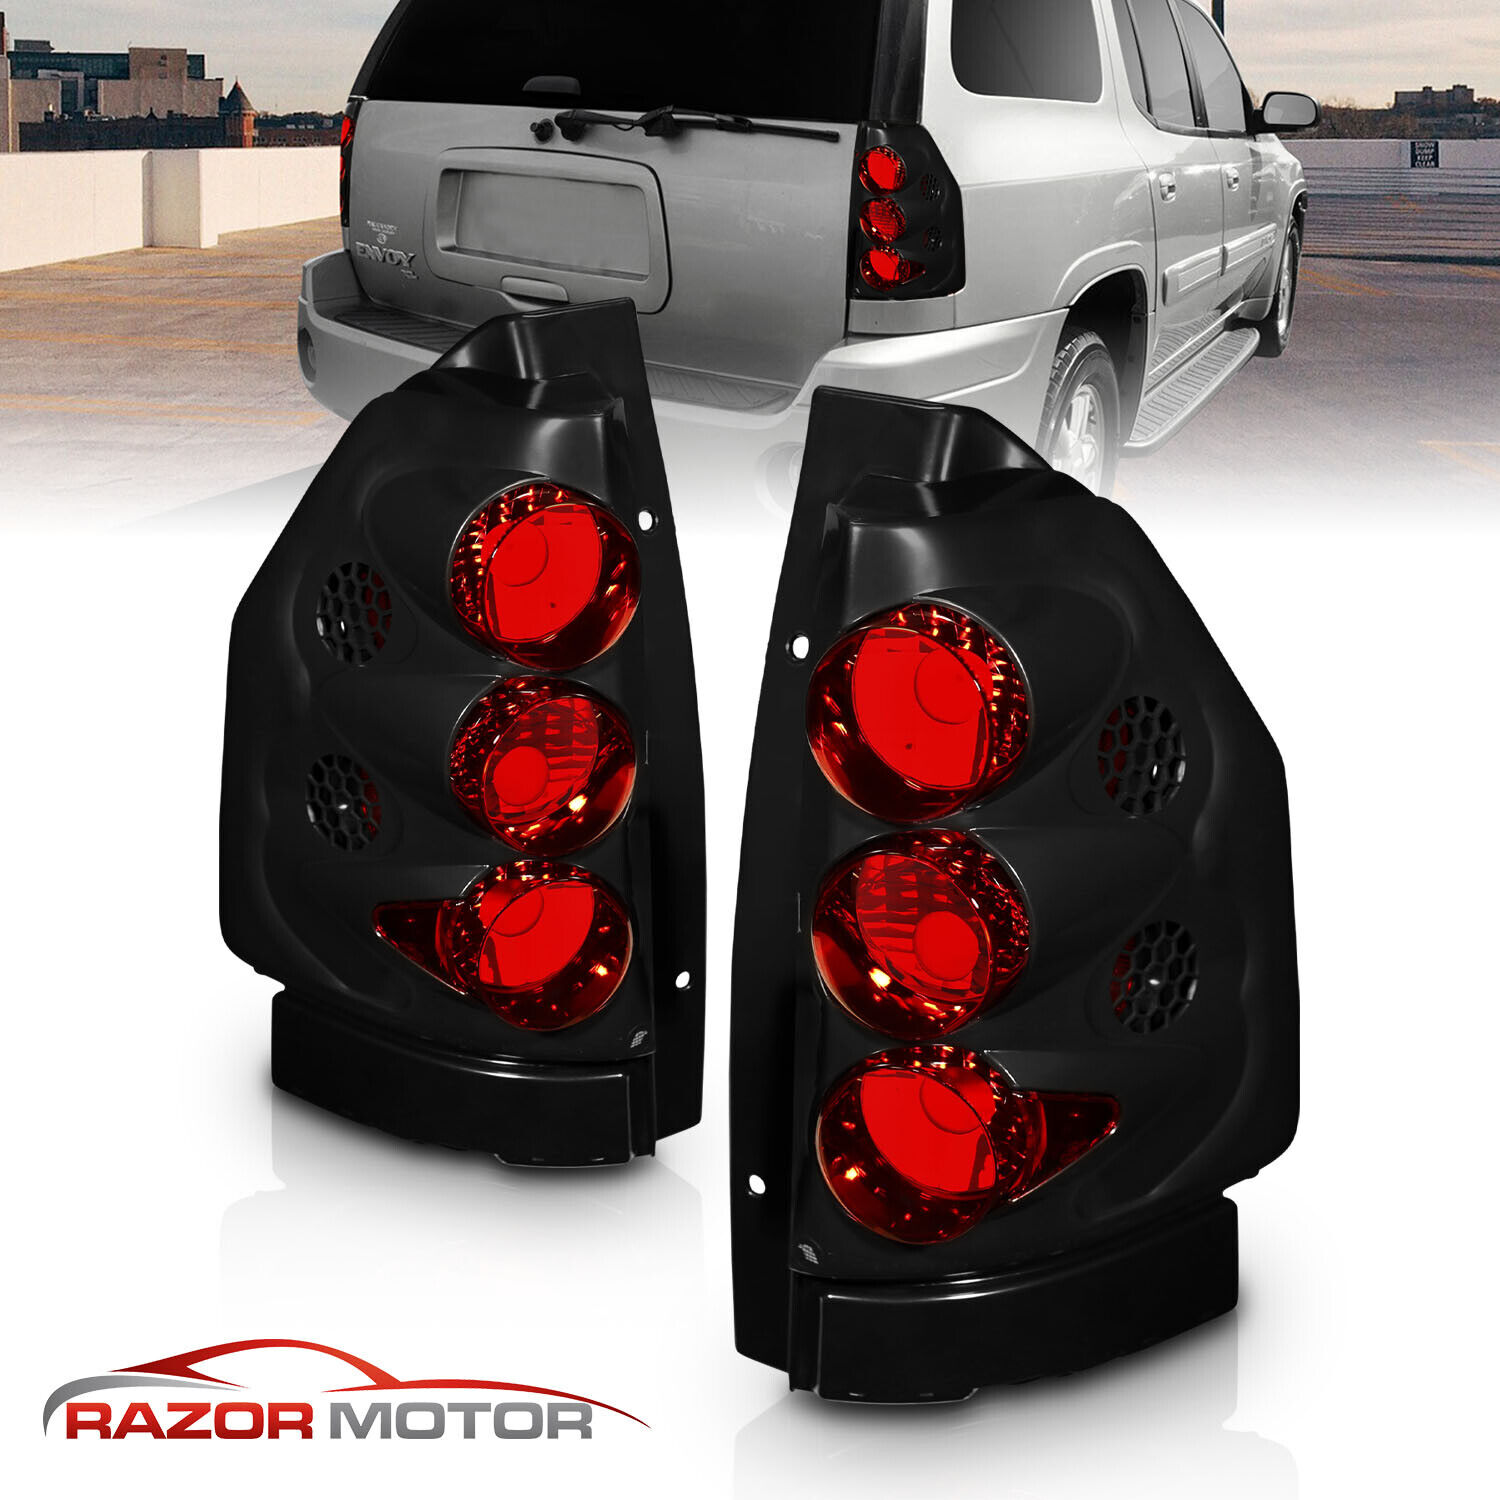 02-09 For GMC Envoy Tail Lights Rear Brake Lamps Black BLK Assembly L+R Pair New